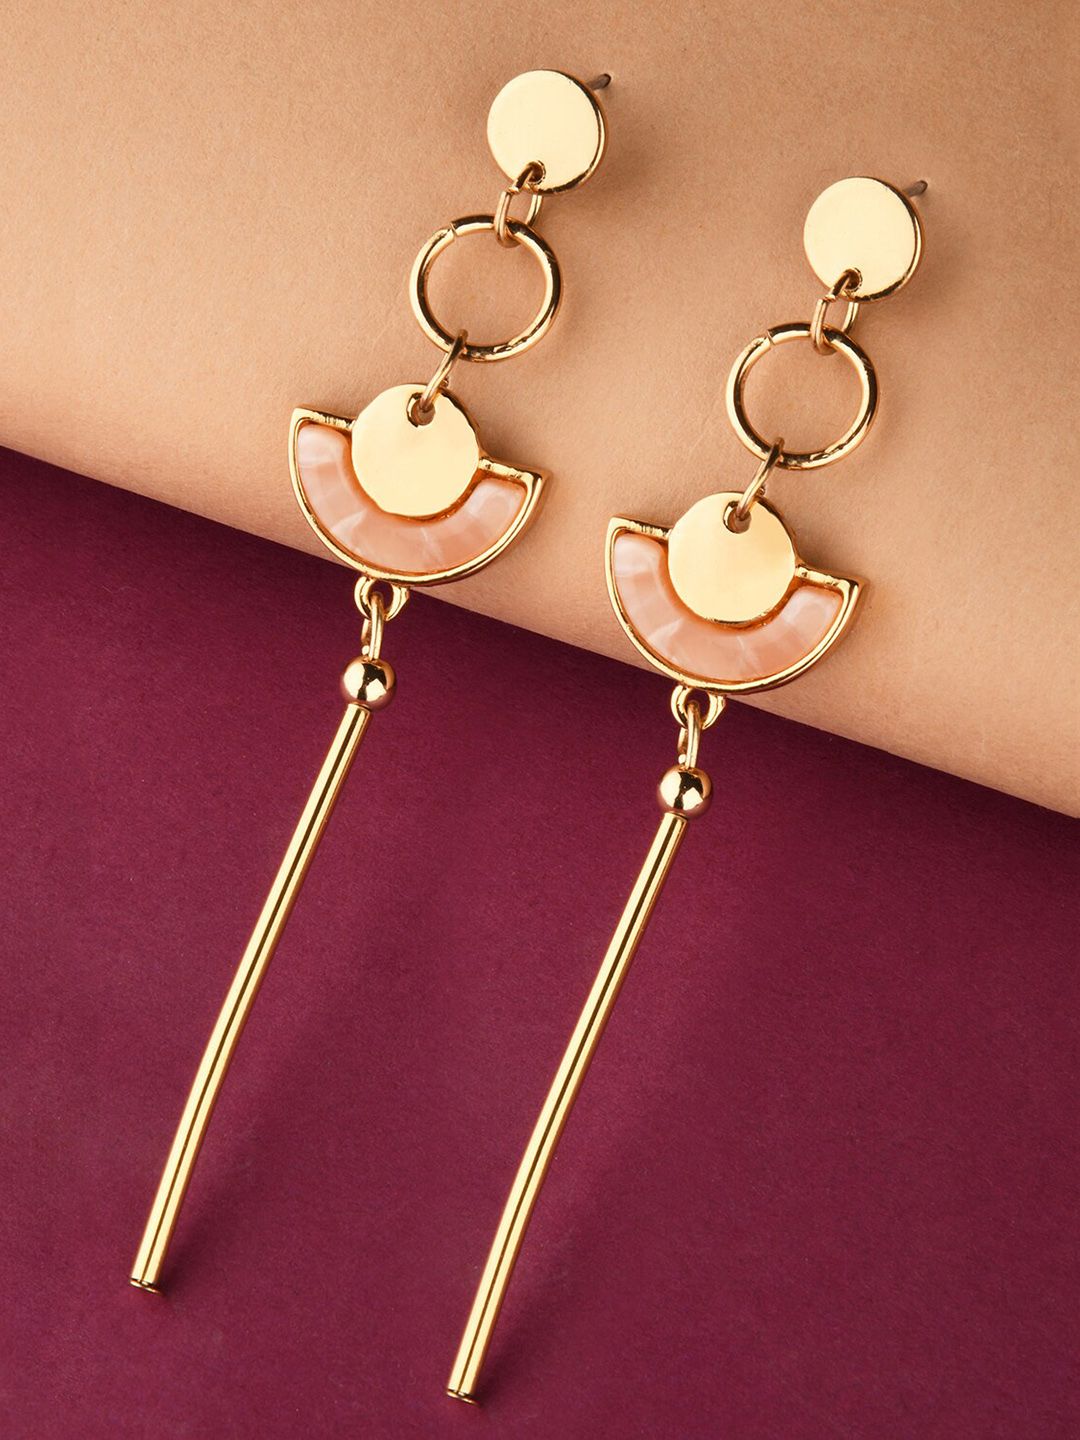 Lilly & sparkle Gold-Toned Contemporary Drop Earrings Price in India